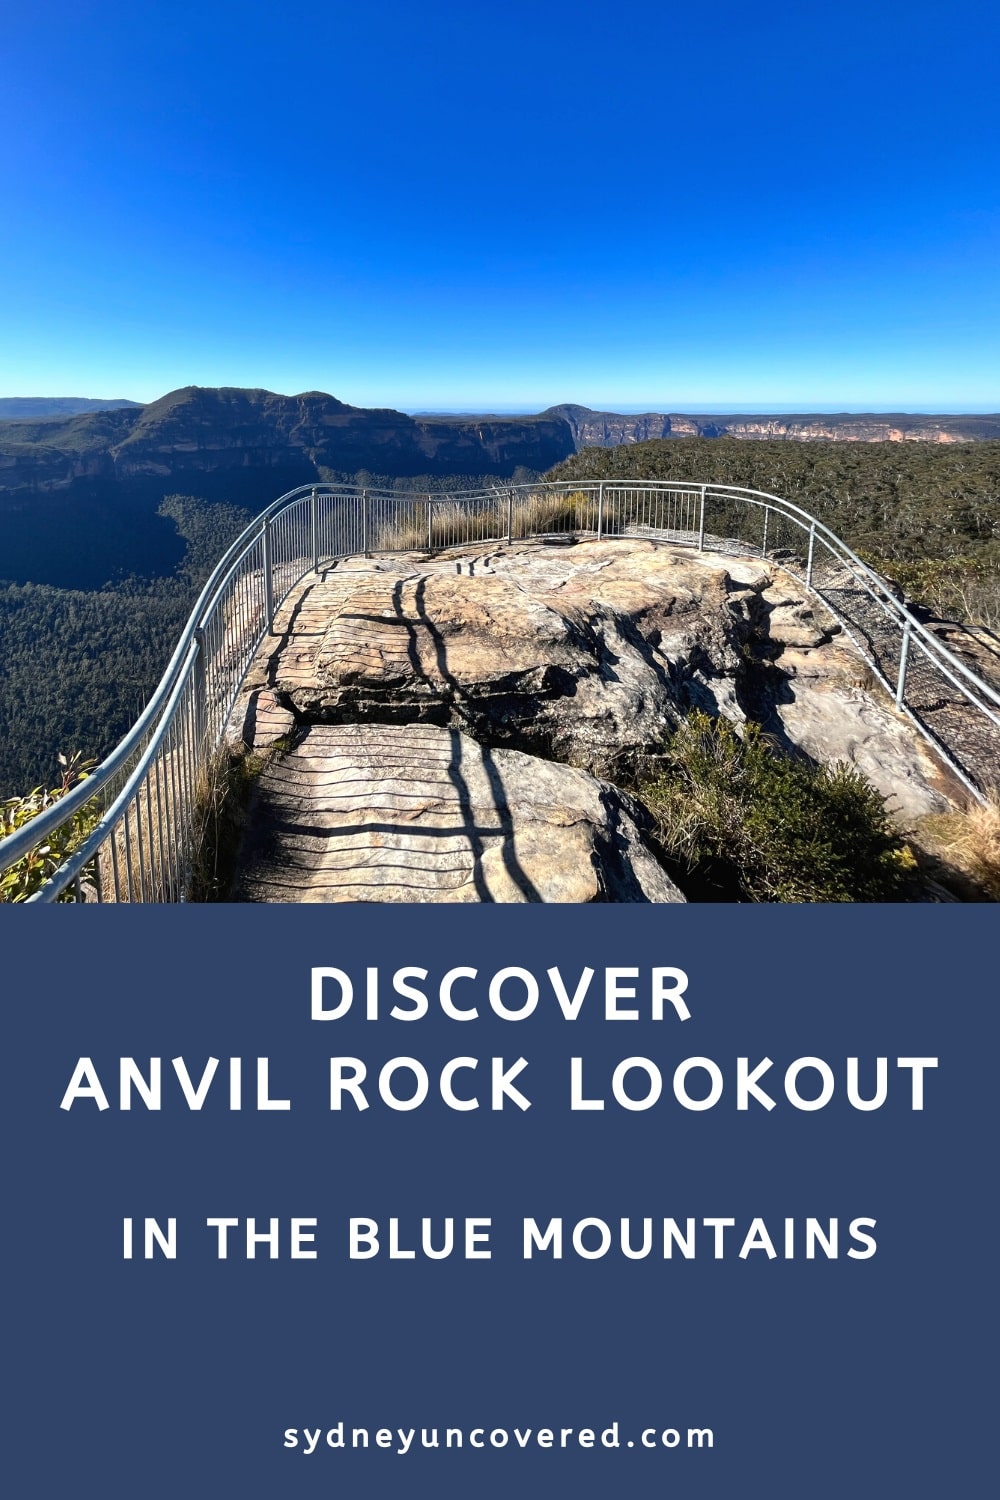 Discover Anvil Rock Lookout in the Blue Mountains